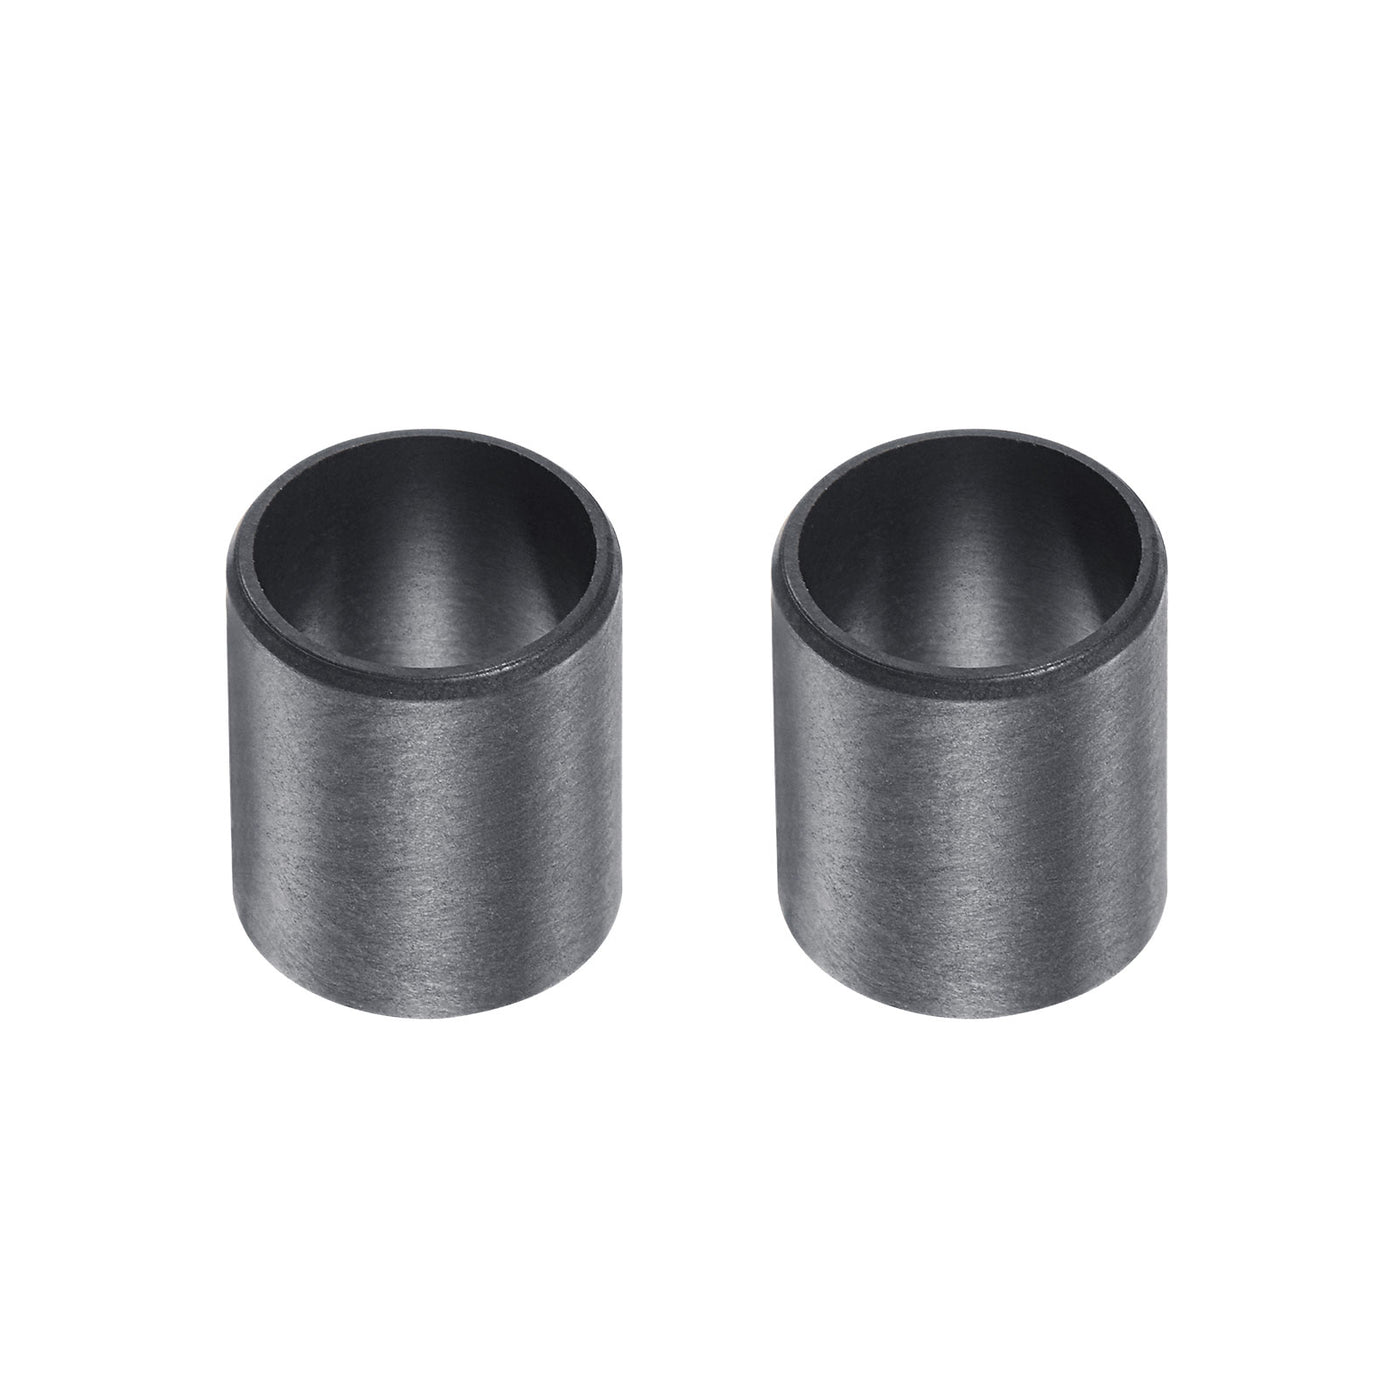 uxcell Uxcell Sleeve Bearings 12mmx14mmx17mm POM Wrapped Oilless Bushings Black 2pcs